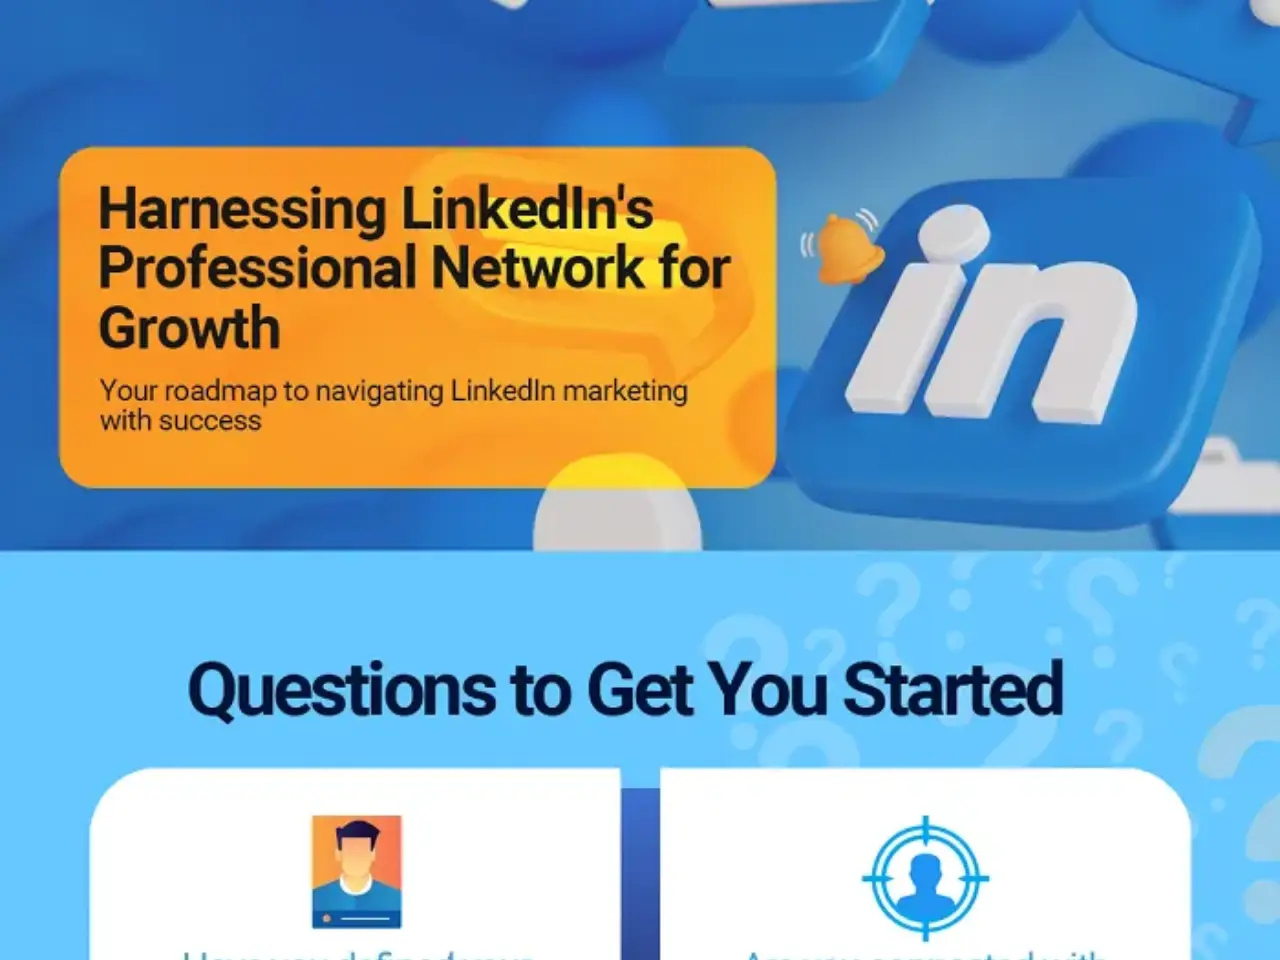 Harnessing LinkedIn's Professional Network for Growth